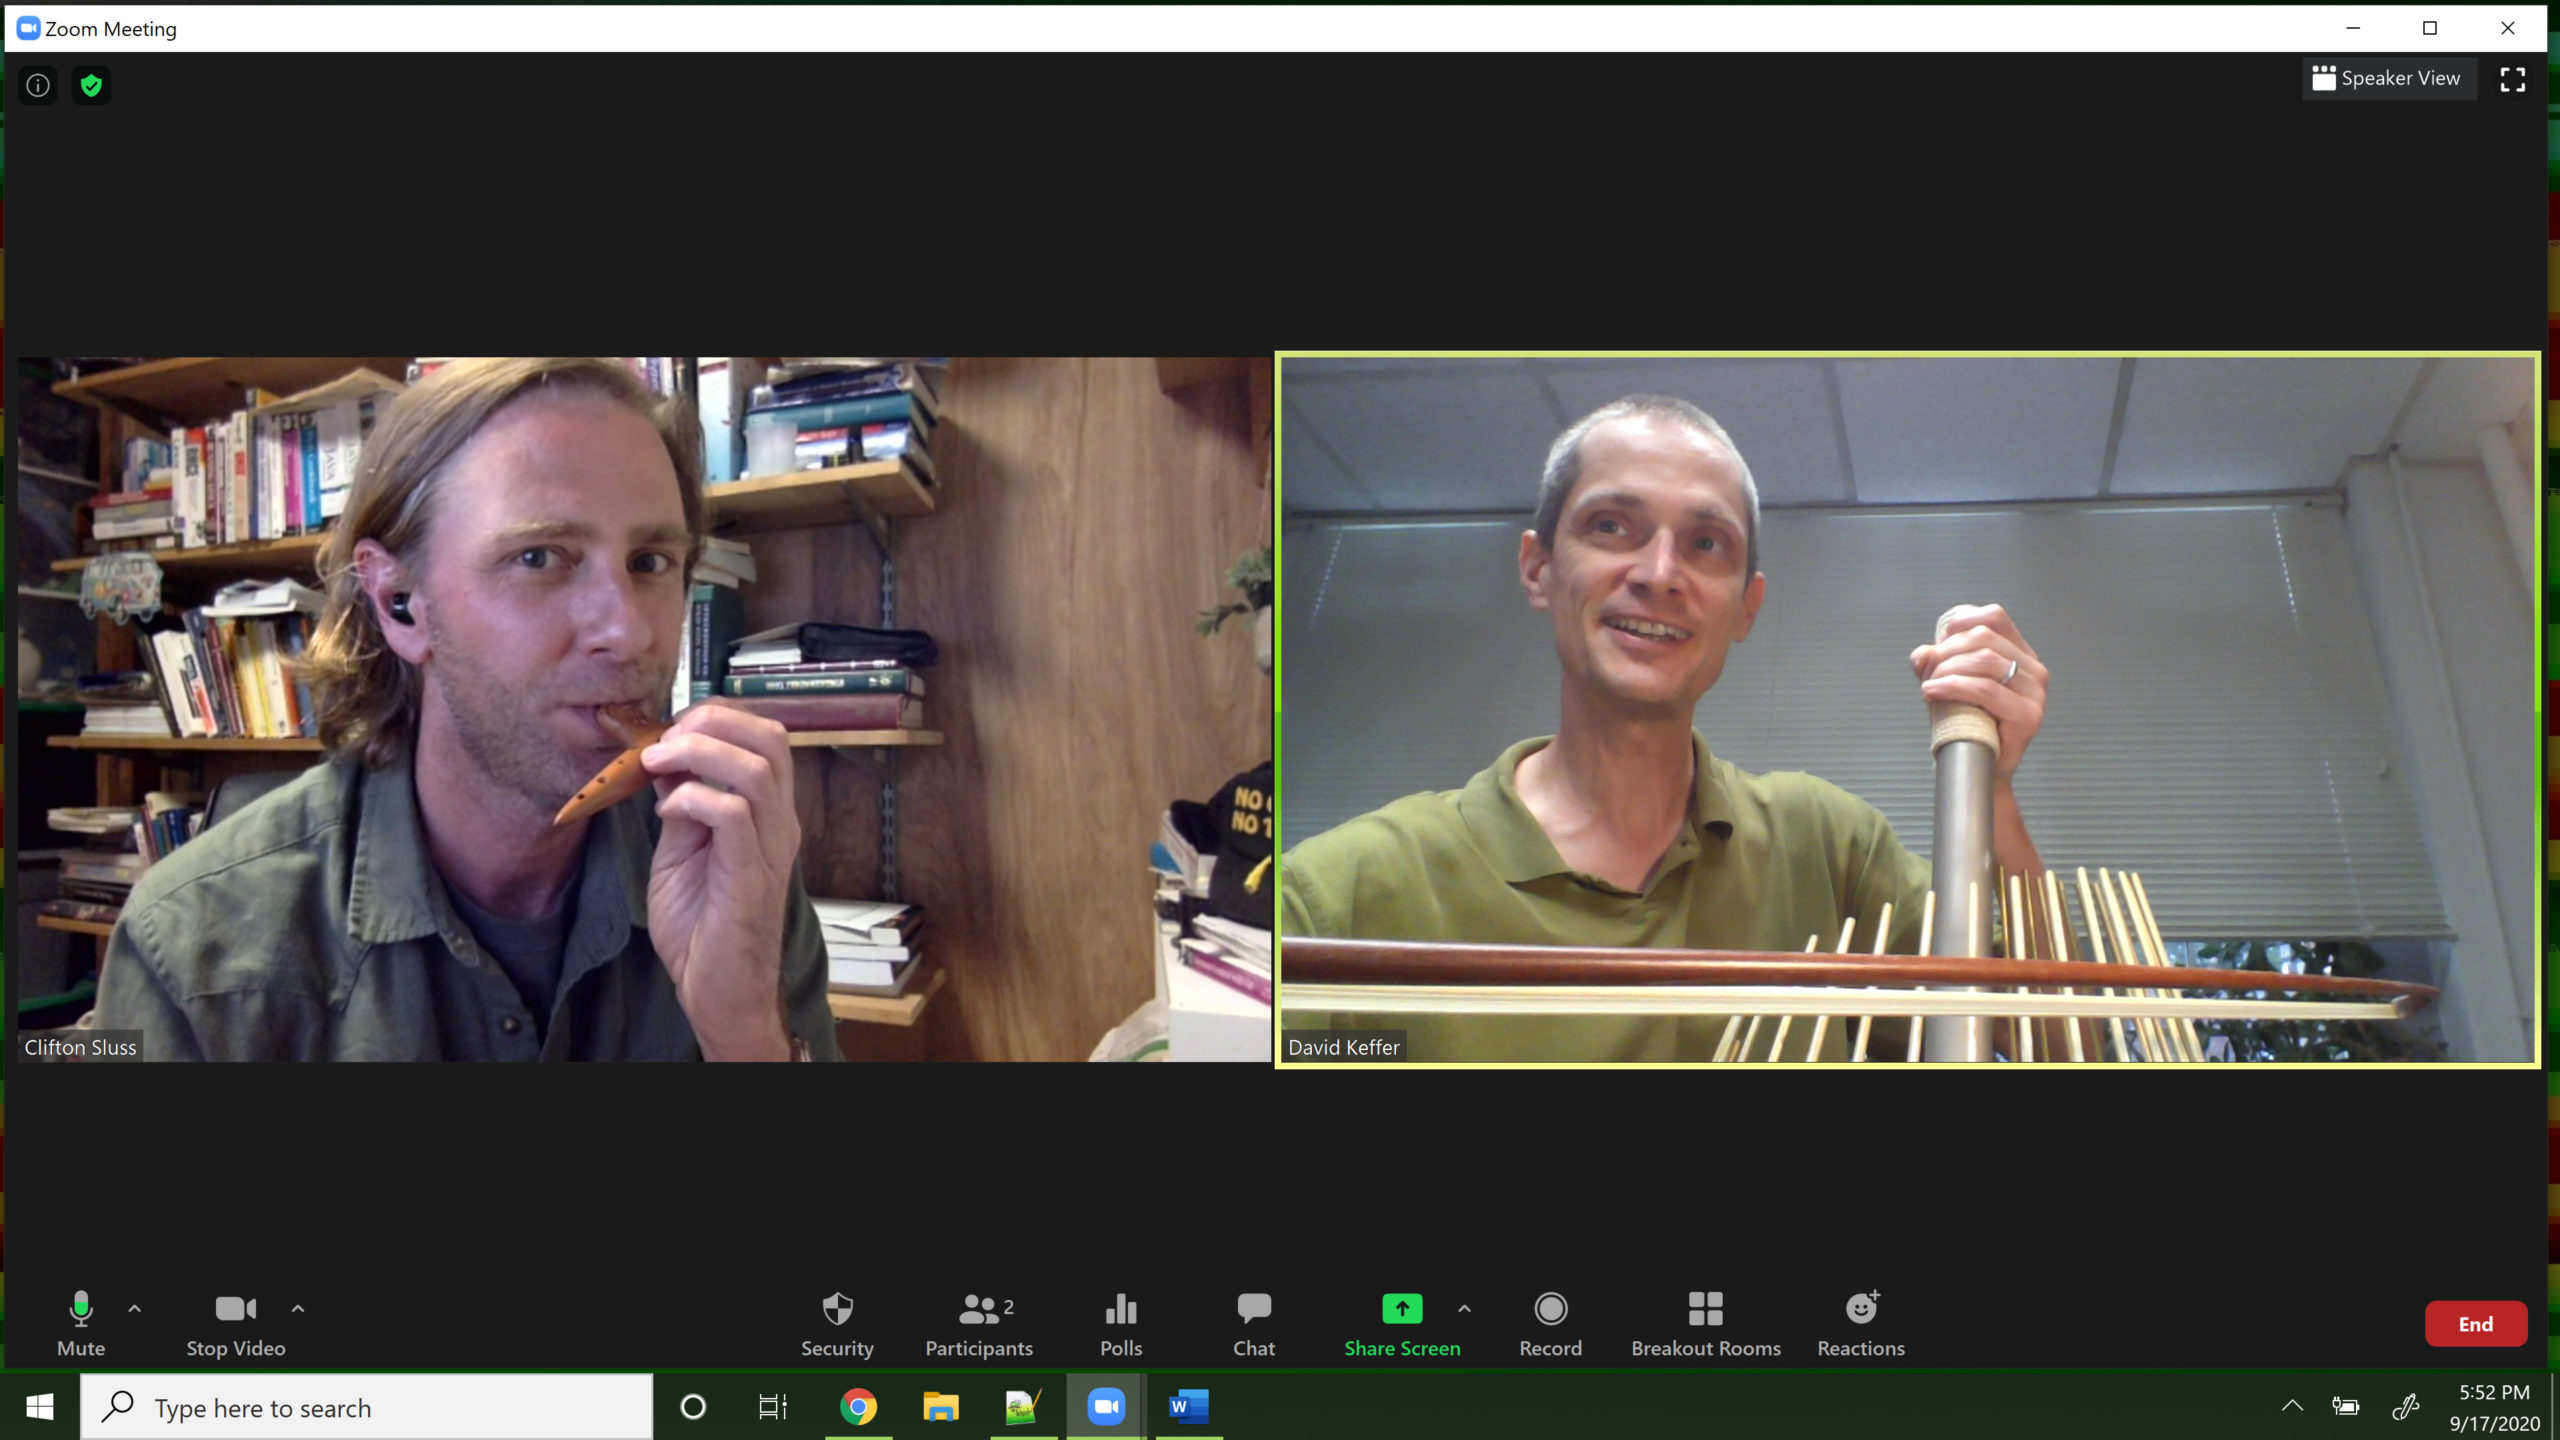 During the virtual interview, PhD student Clifton Sluss and Professor Keffer performed a duet with Keffer on the waterphone and Sluss on the ocarina.